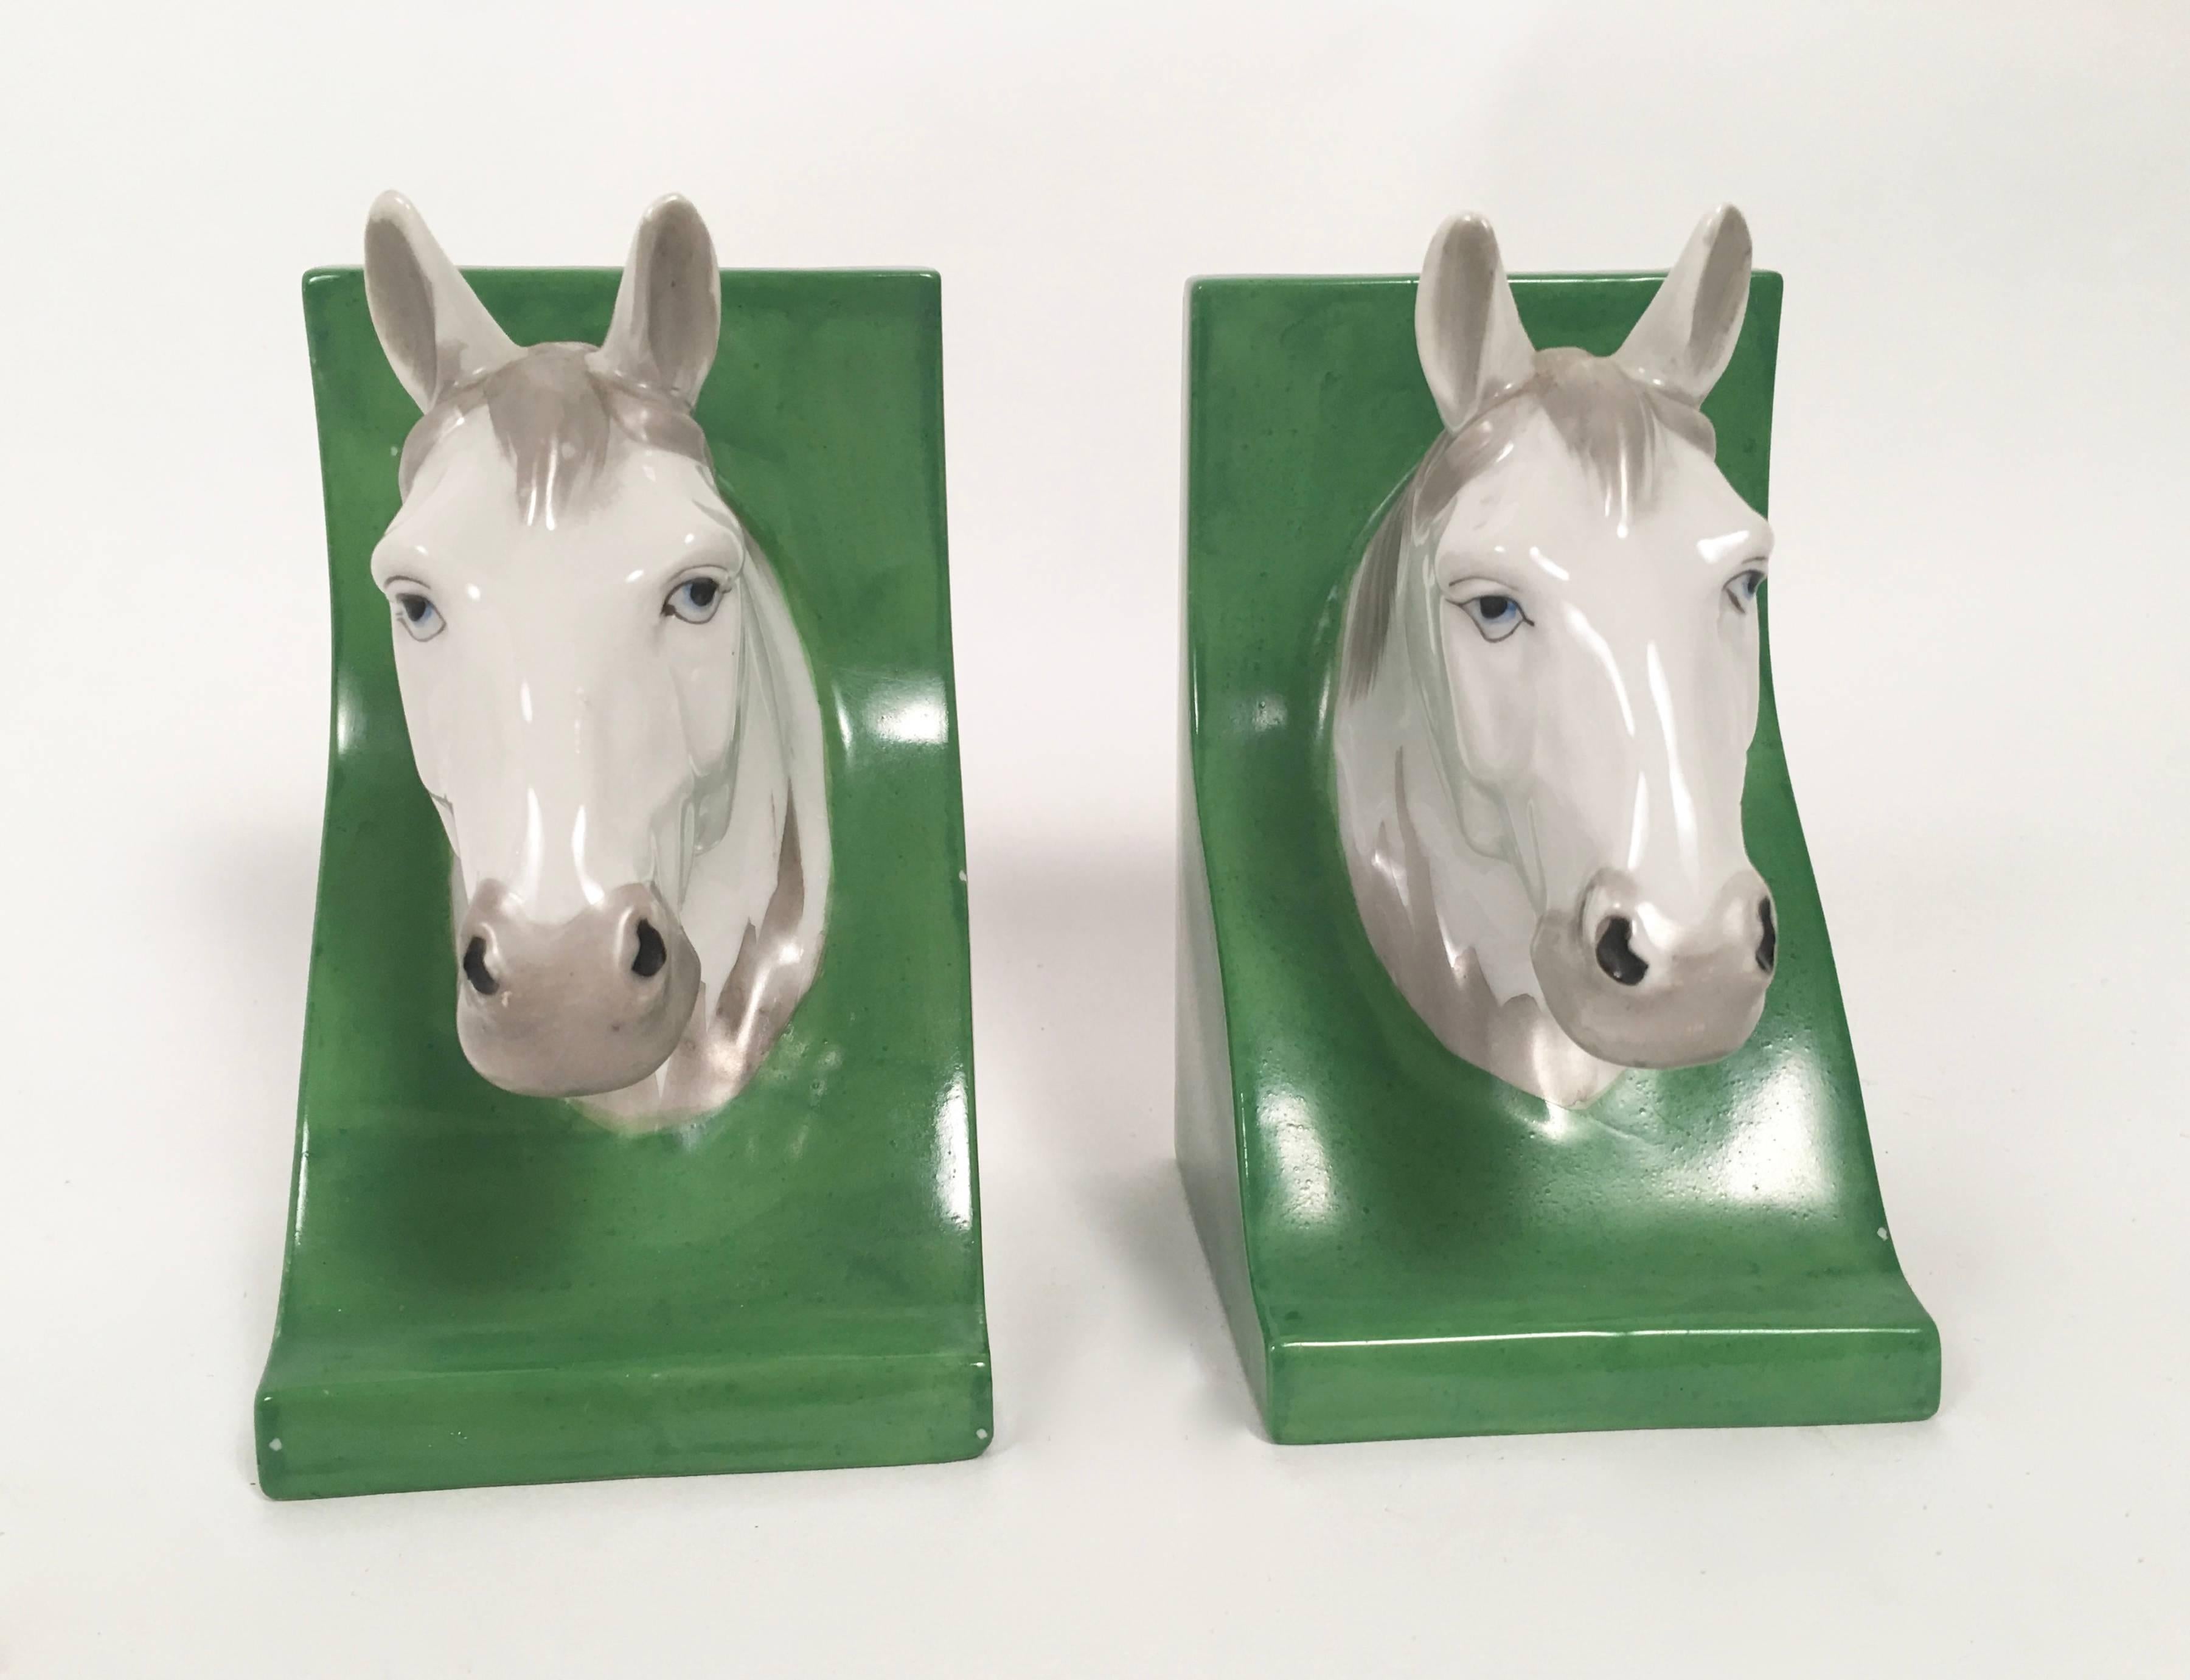 Japanese Pair of Horse Head Bookends